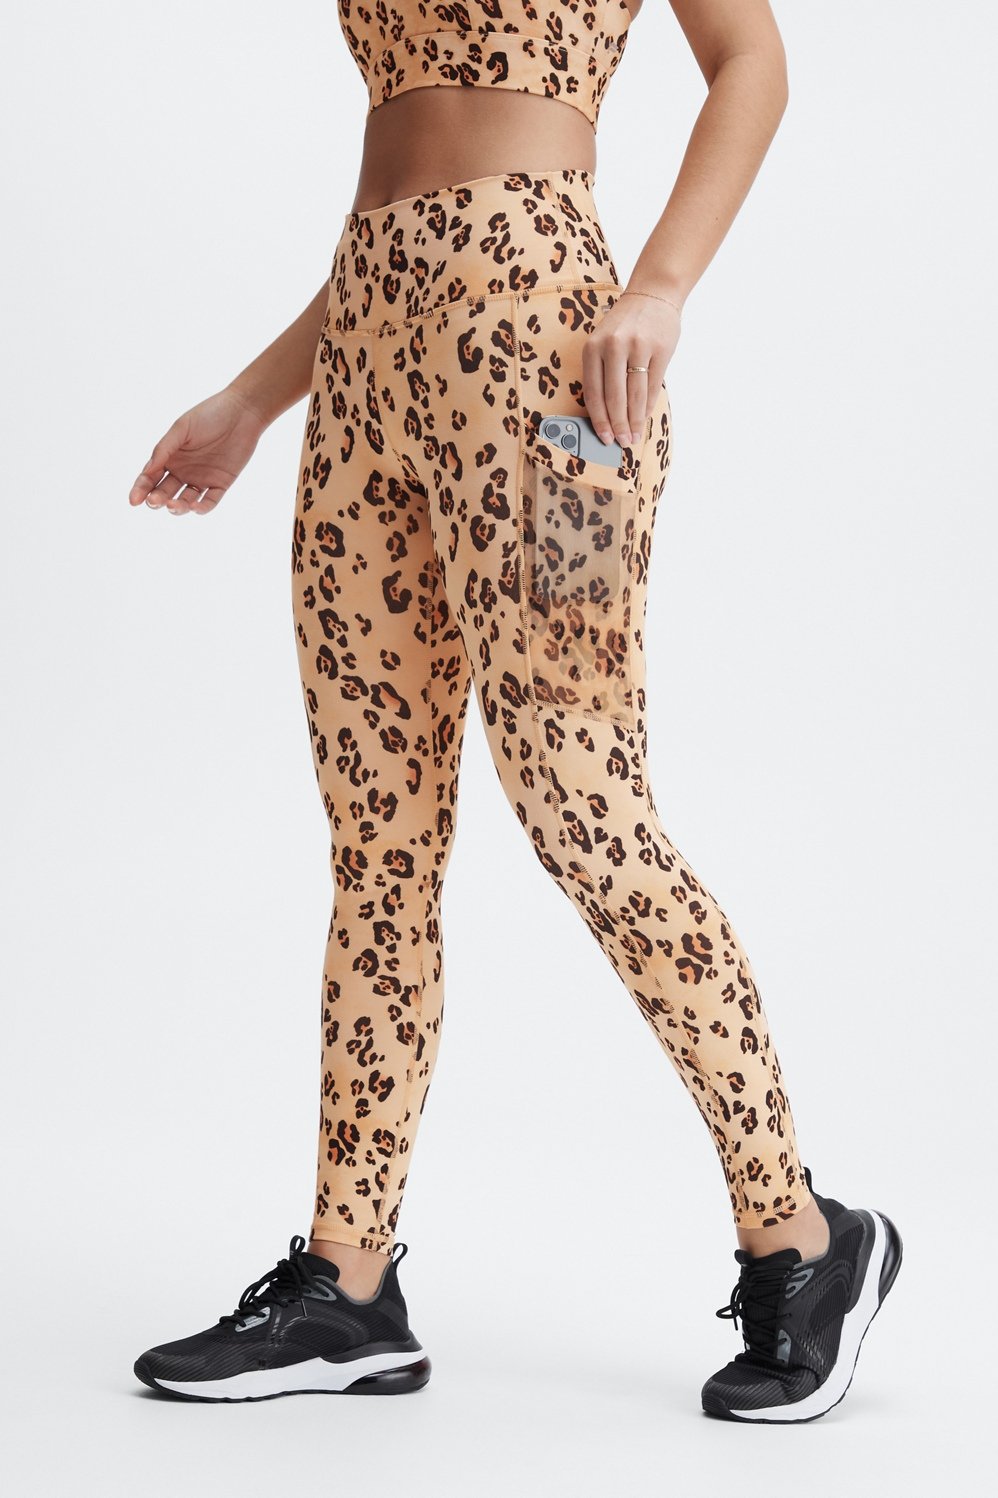 LEOPARD PRINT JEGGINGS WITH POCKETS SIZE SMALL/MEDIUM